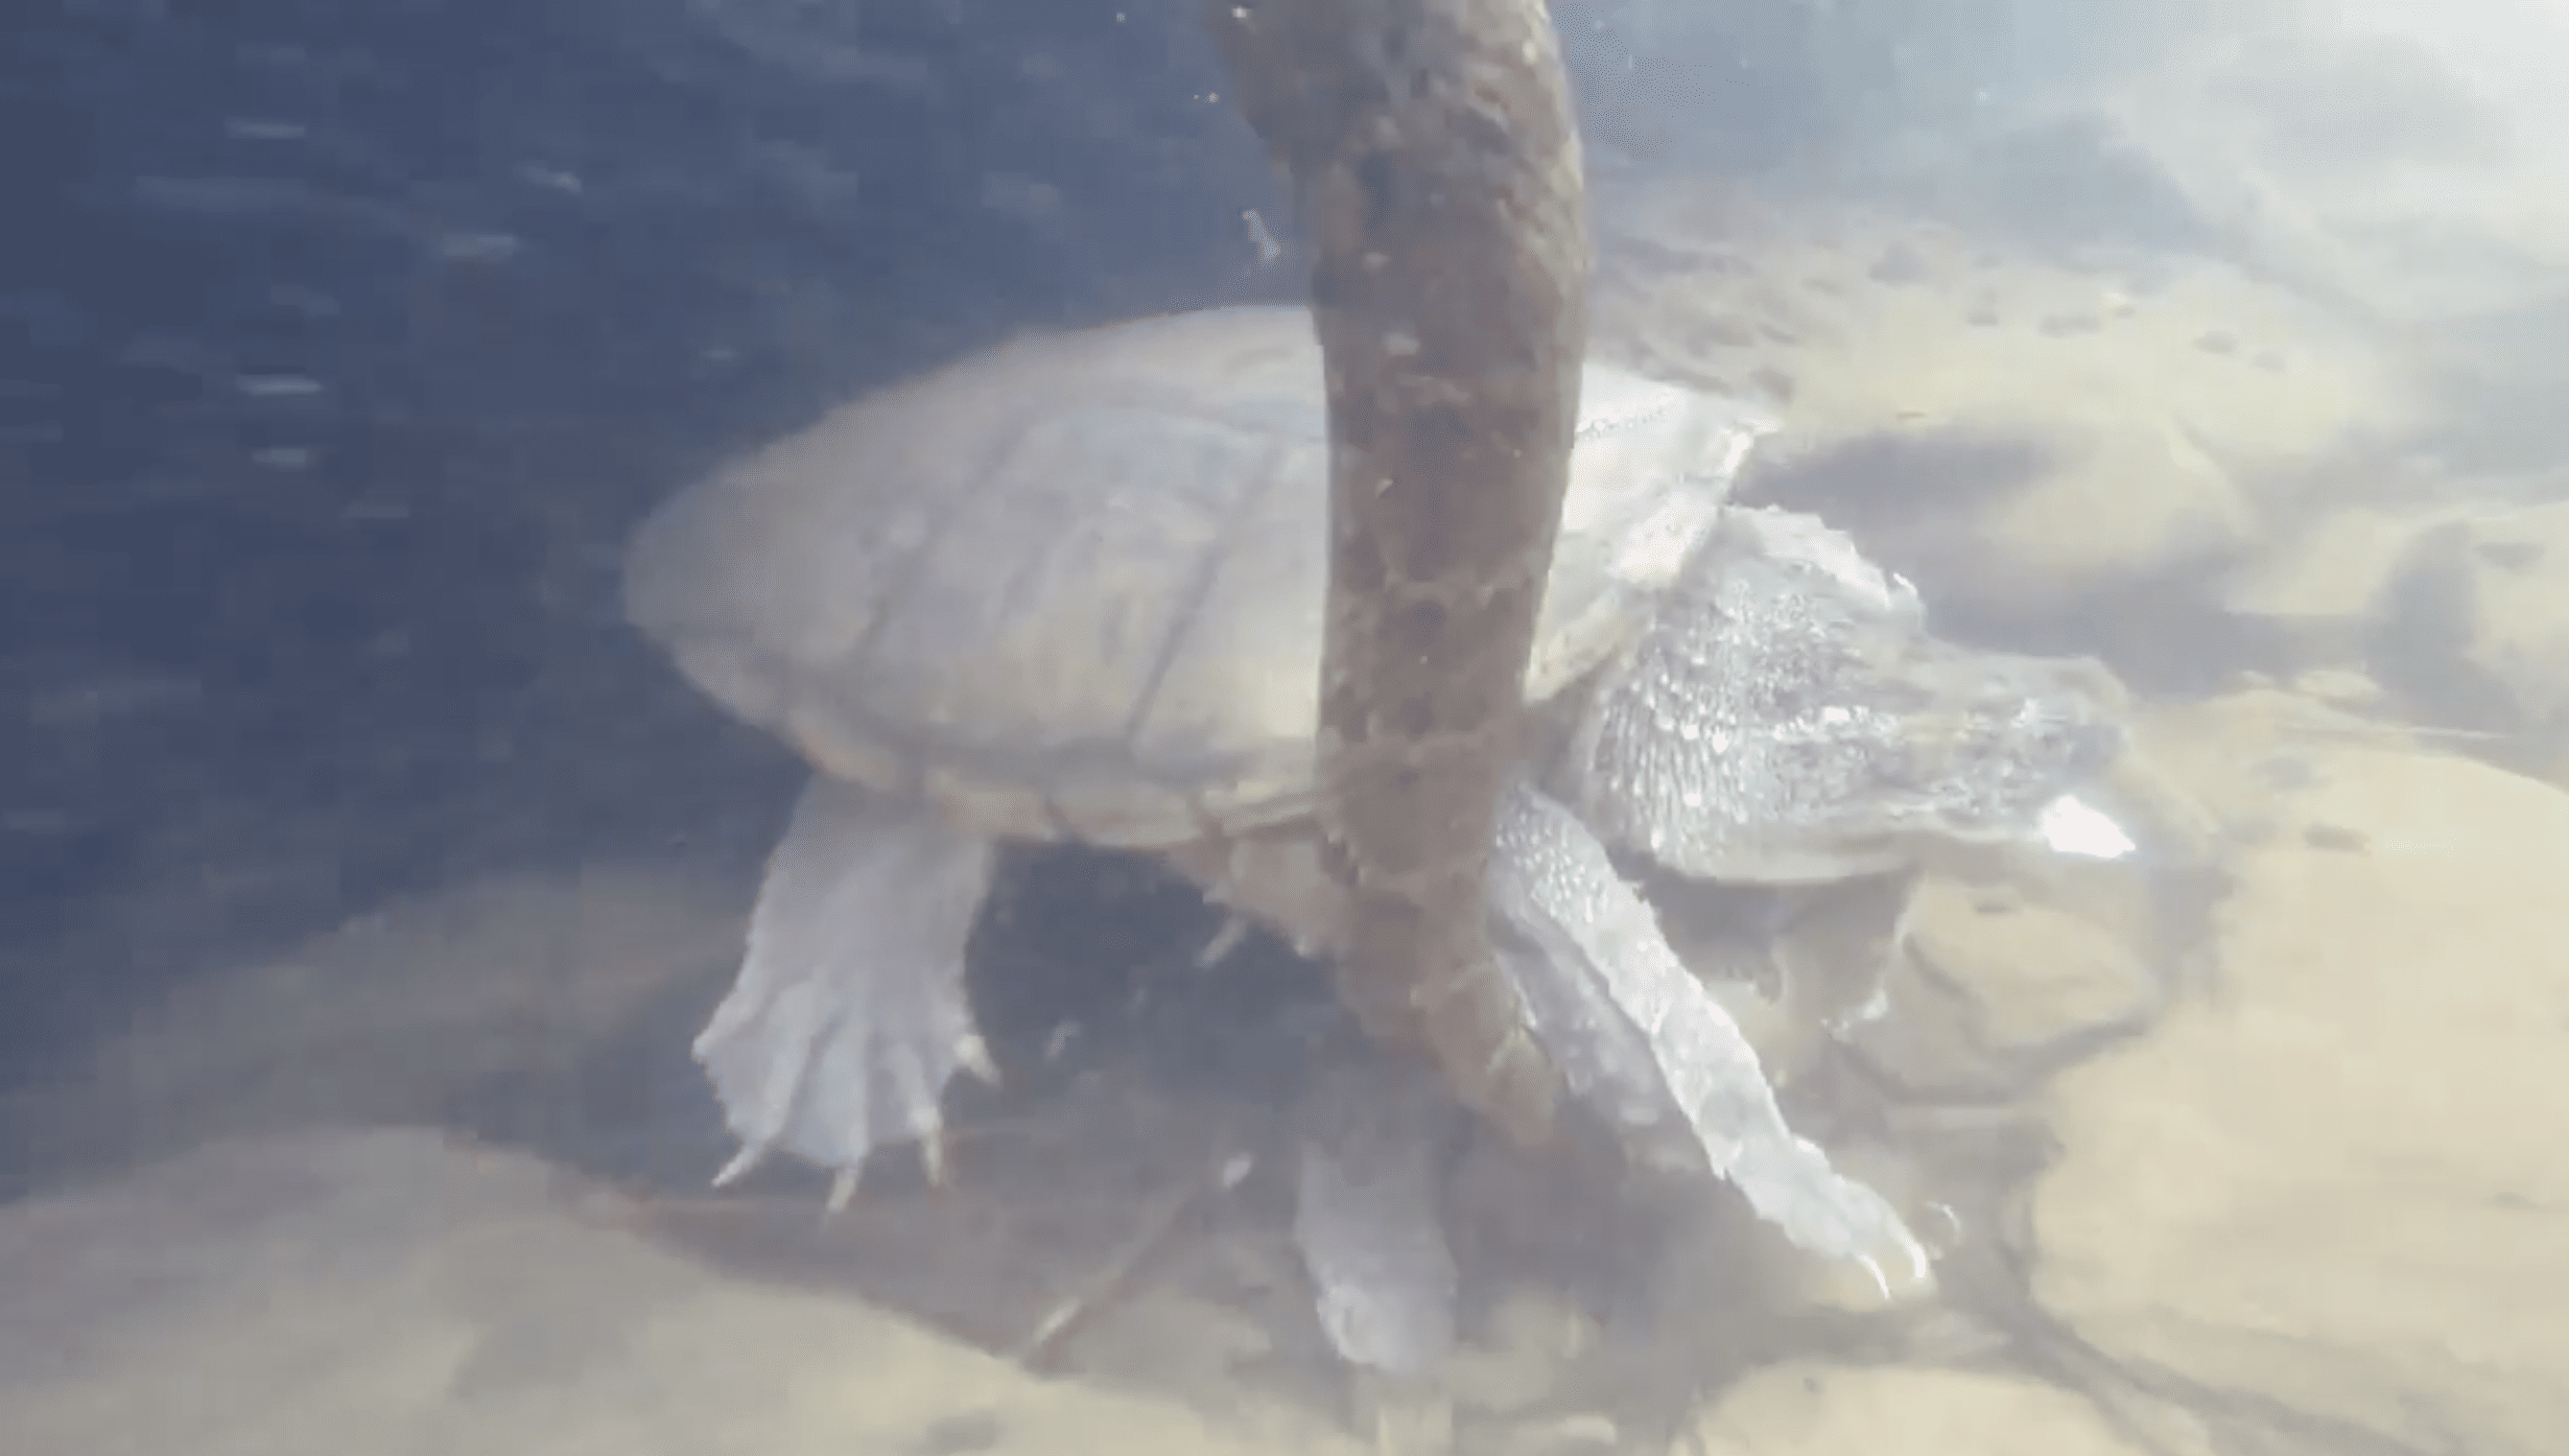 Snapping Turtle Eats Water Snake Alive